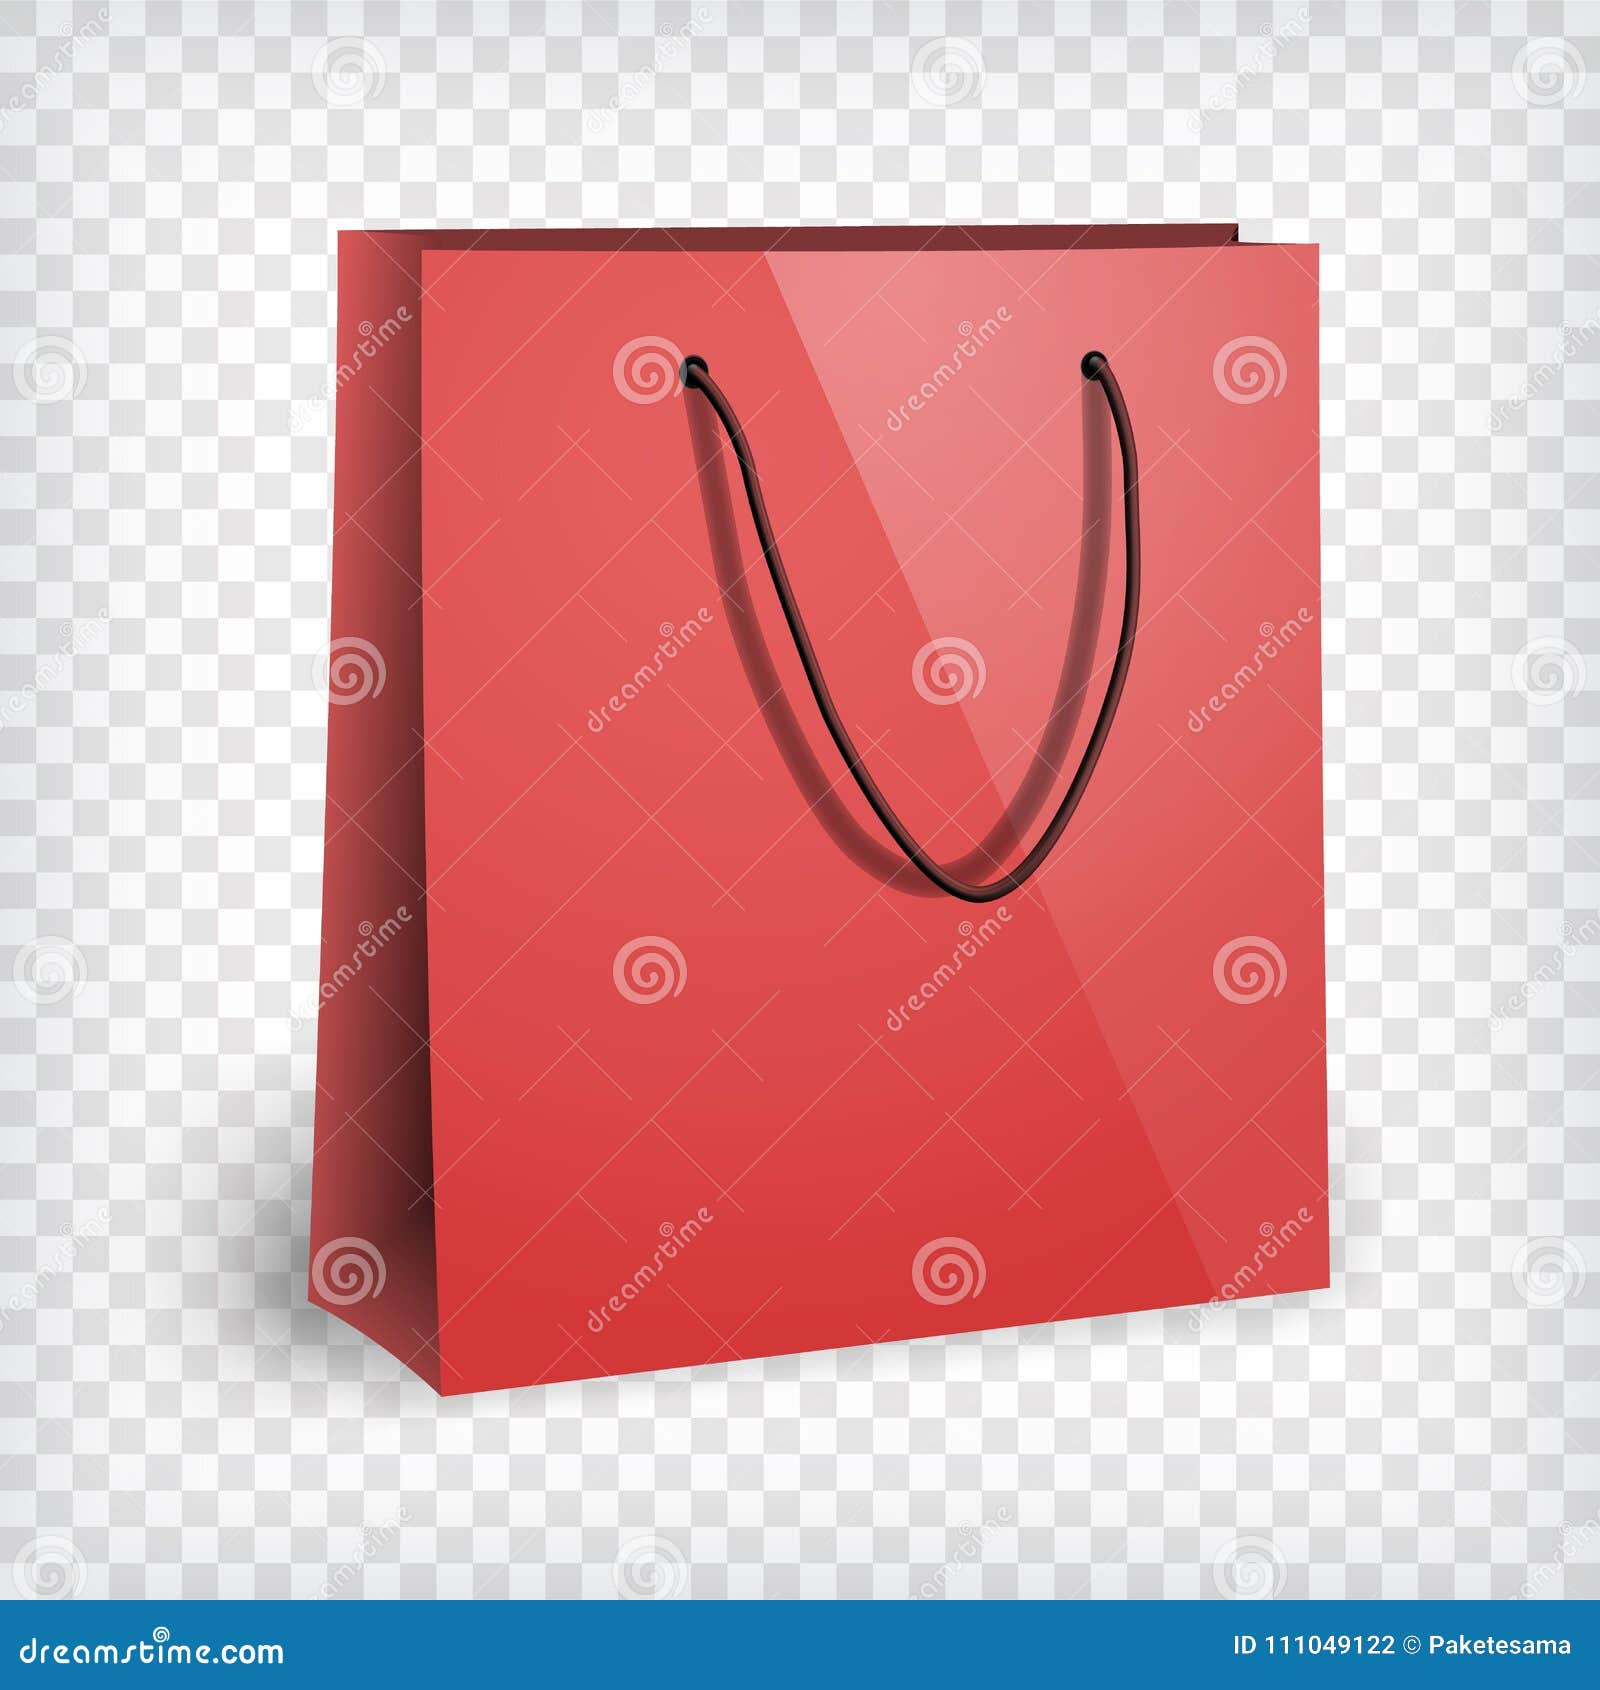 Shopping sale all item red bag background i Vector Image